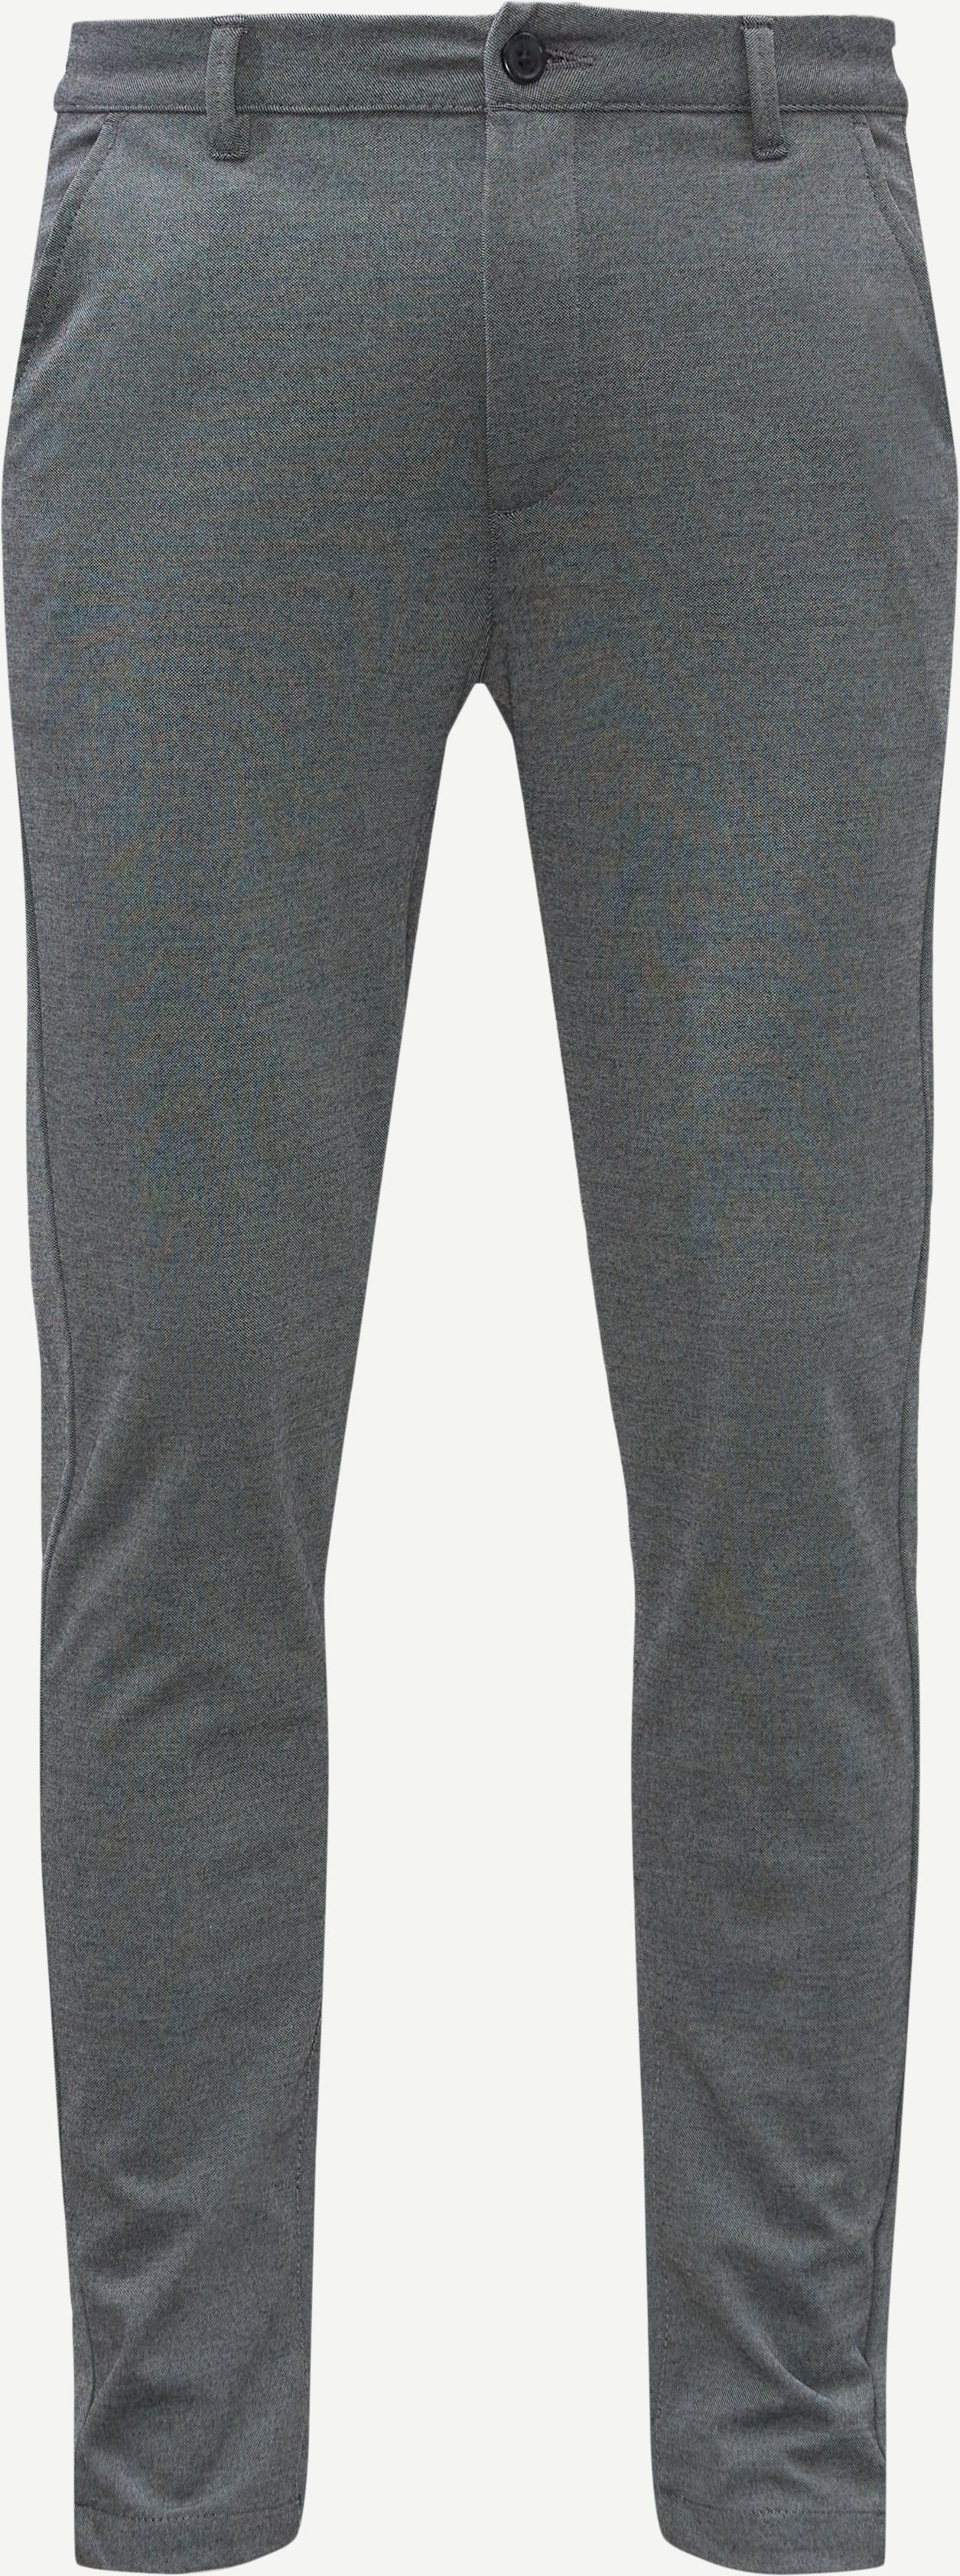 ICELAND Trousers TOTTI Grey